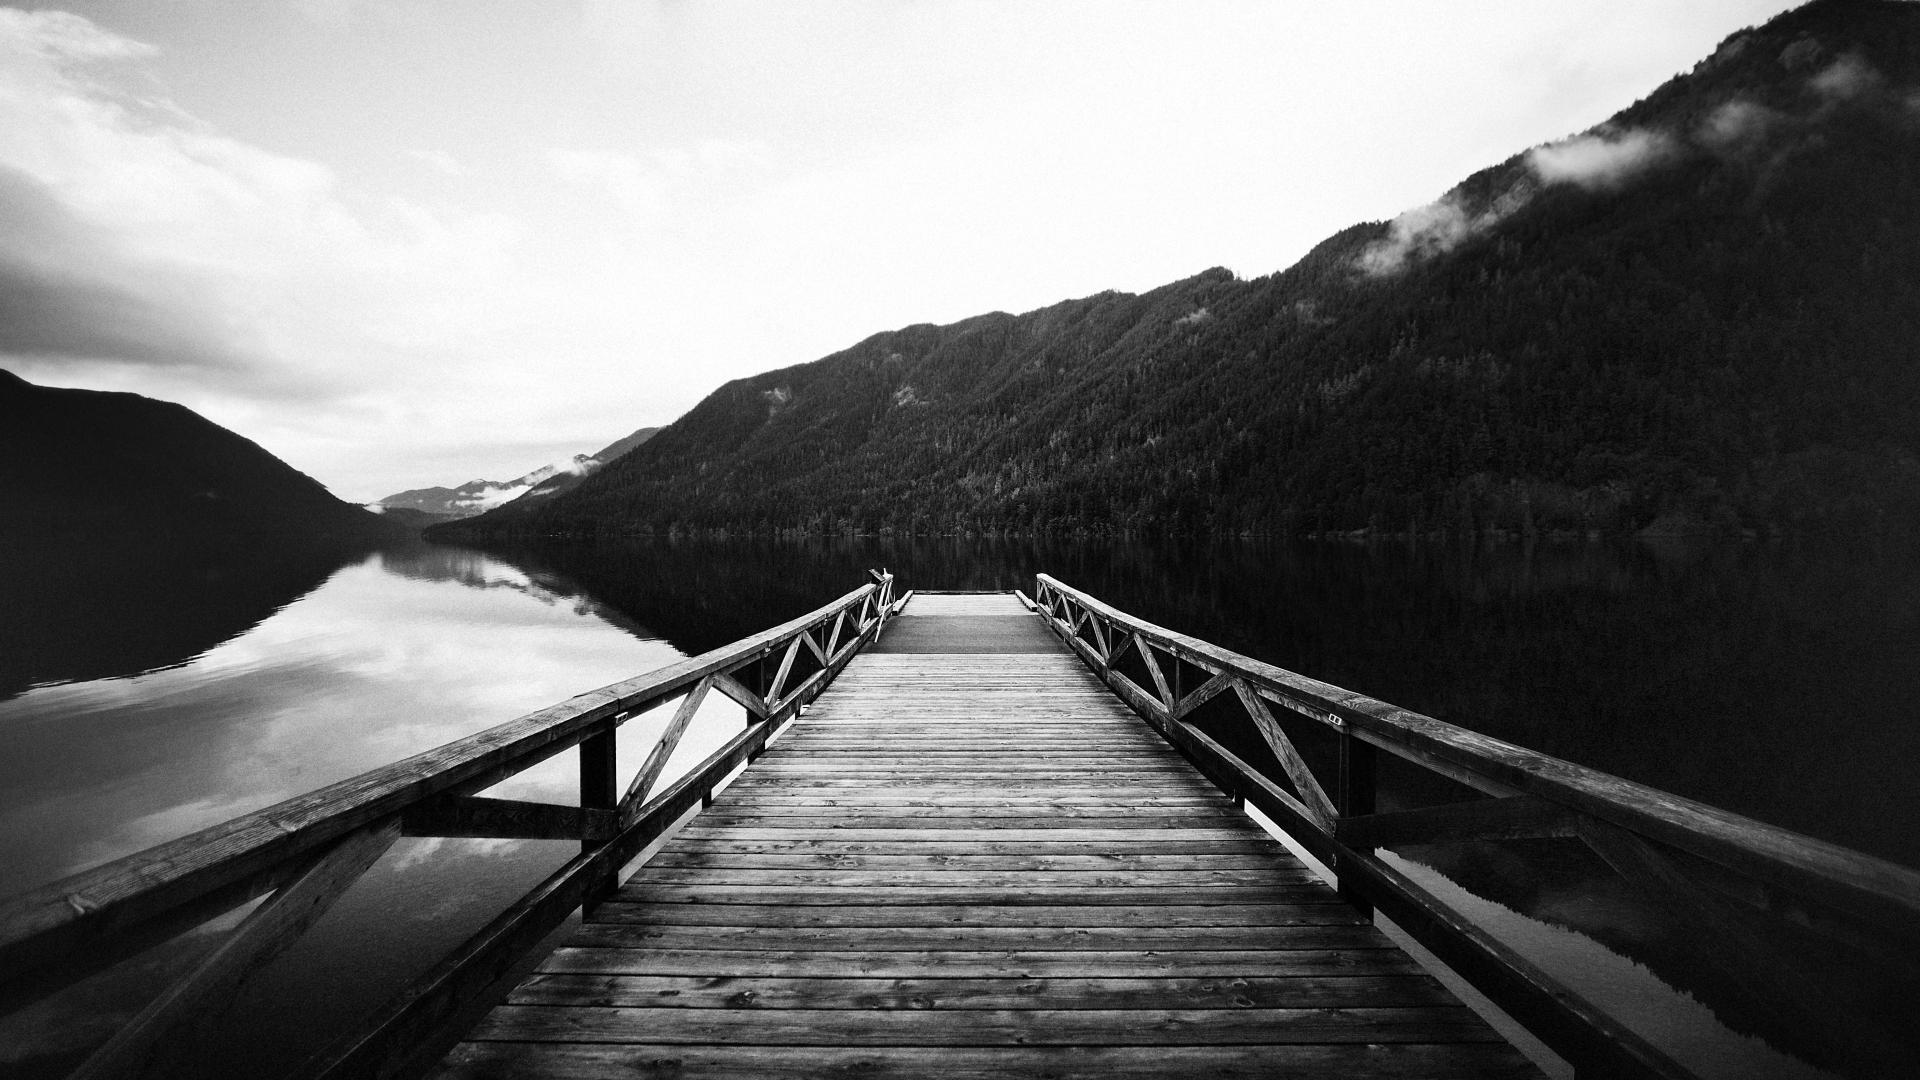 Black and White Scenery Wallpapers - Top Free Black and White Scenery